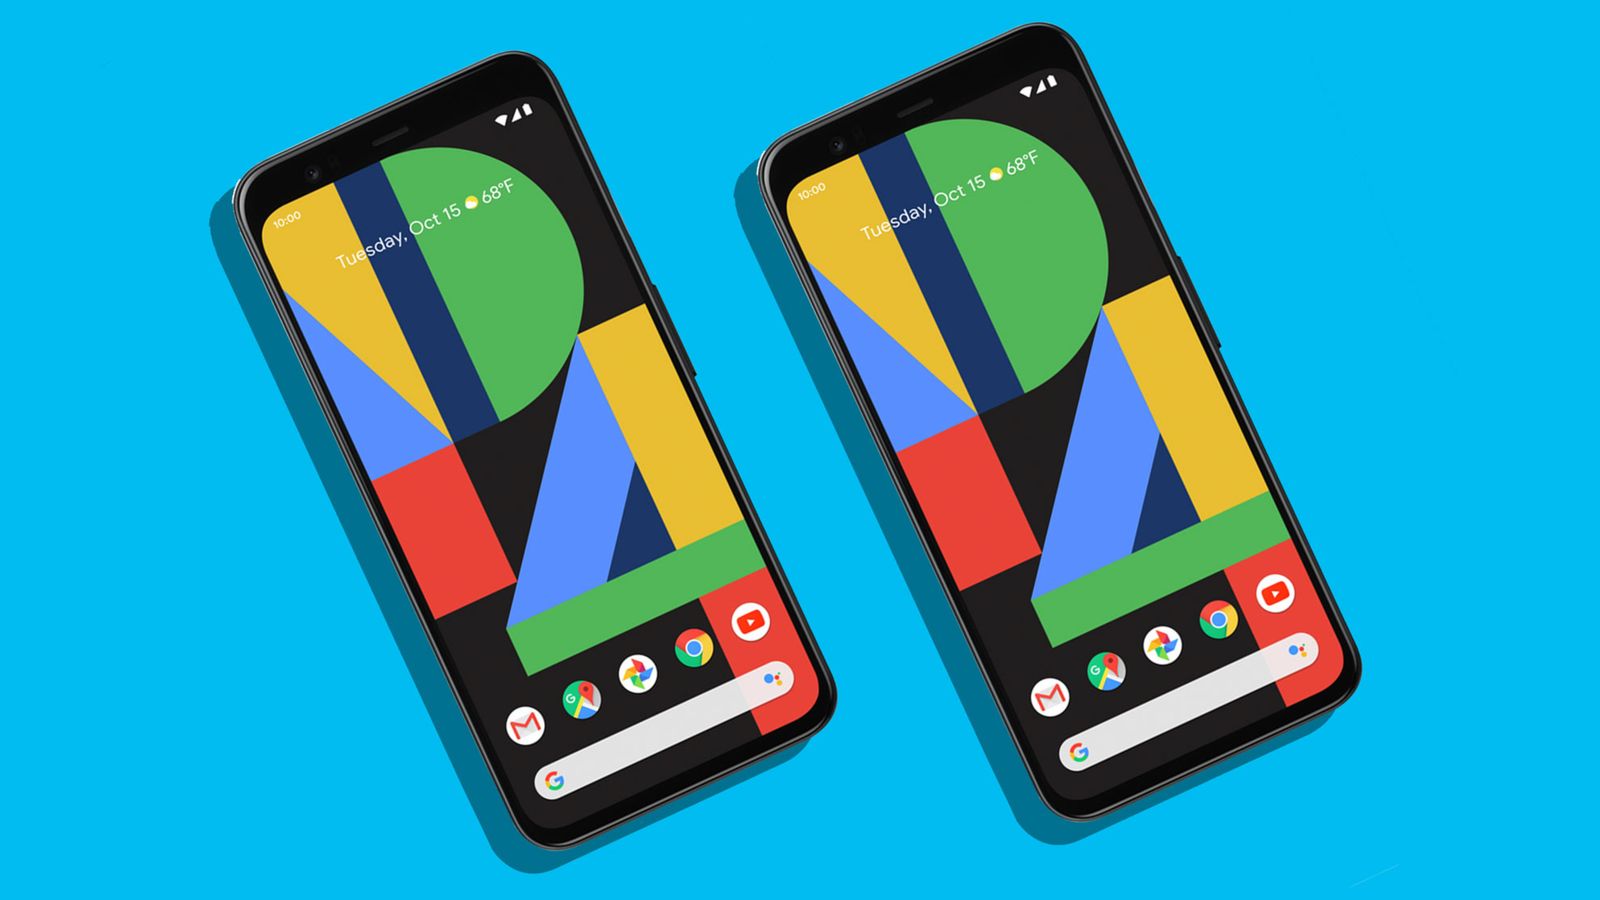 Pre-Ordering Guide For Google Pixel 4